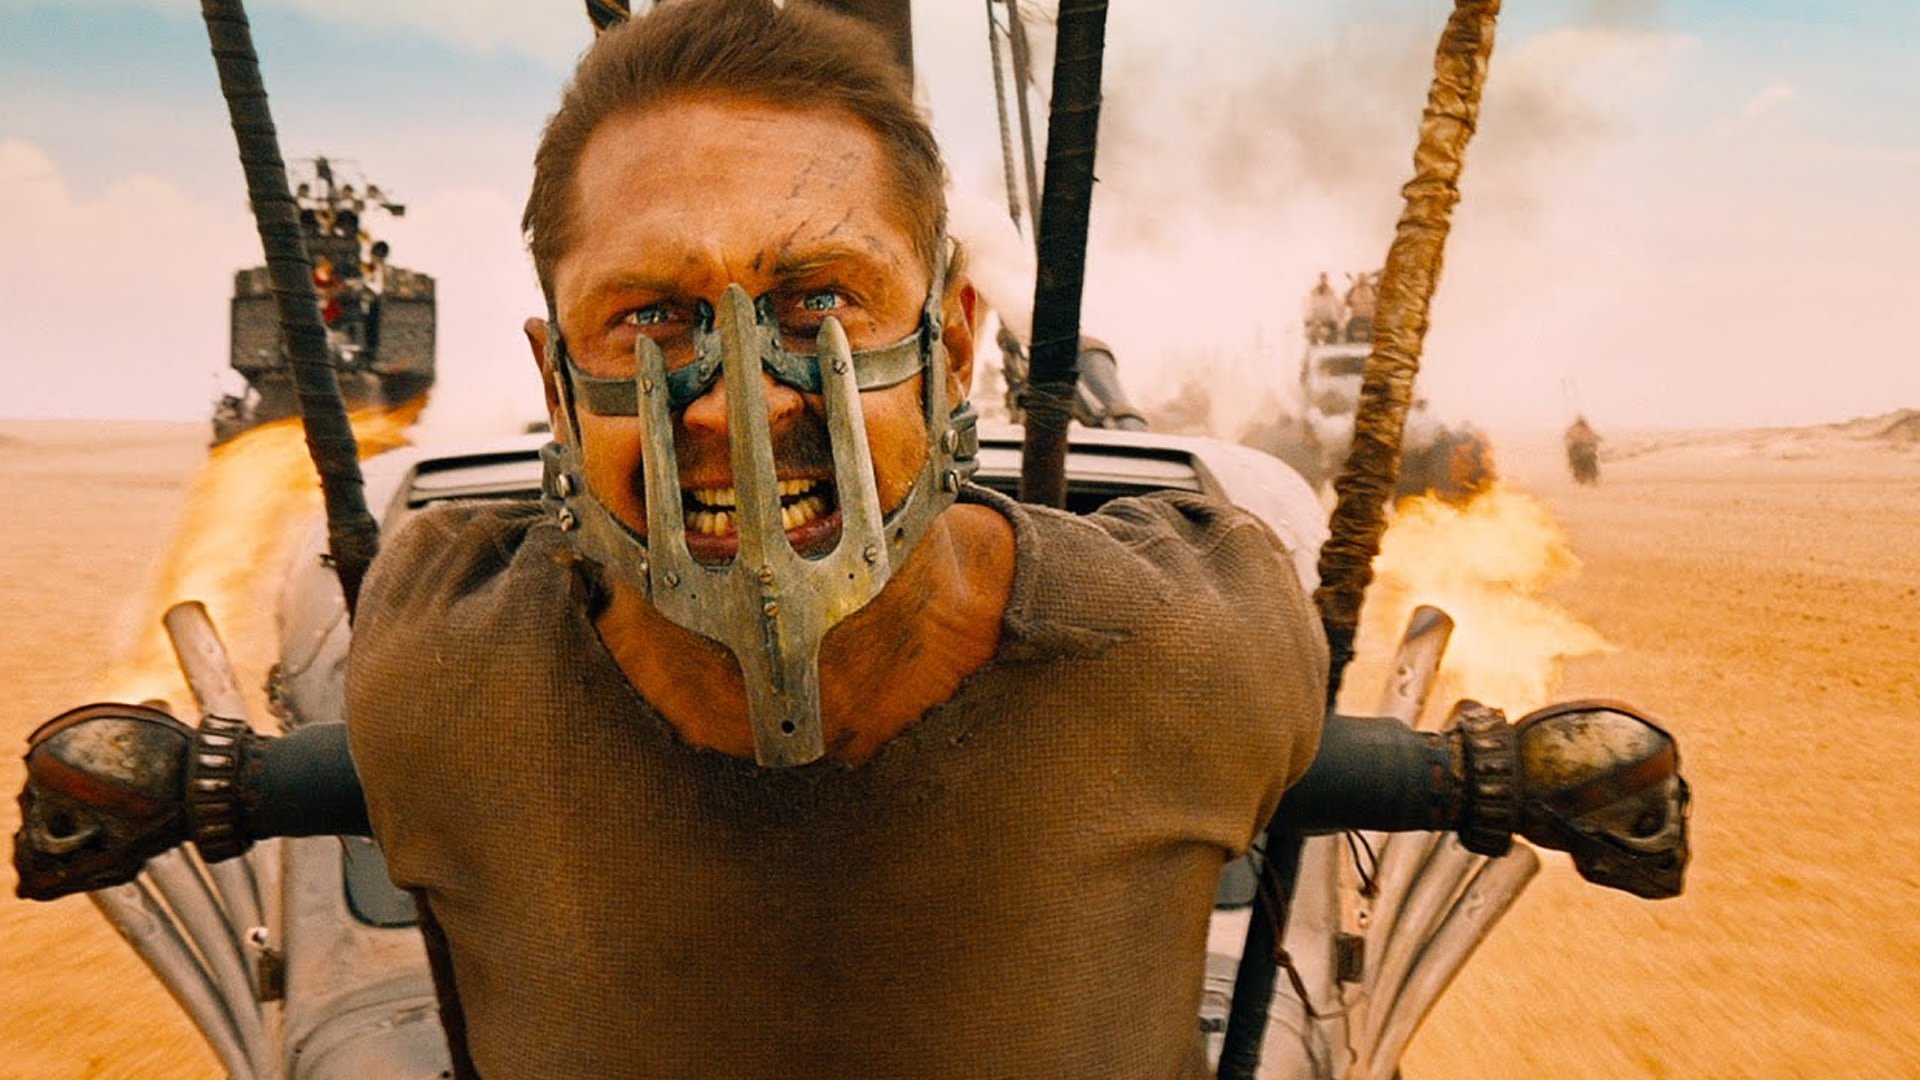 George Miller wants Hideo Kojima to develop a Mad Max game, but 'would never ask him'